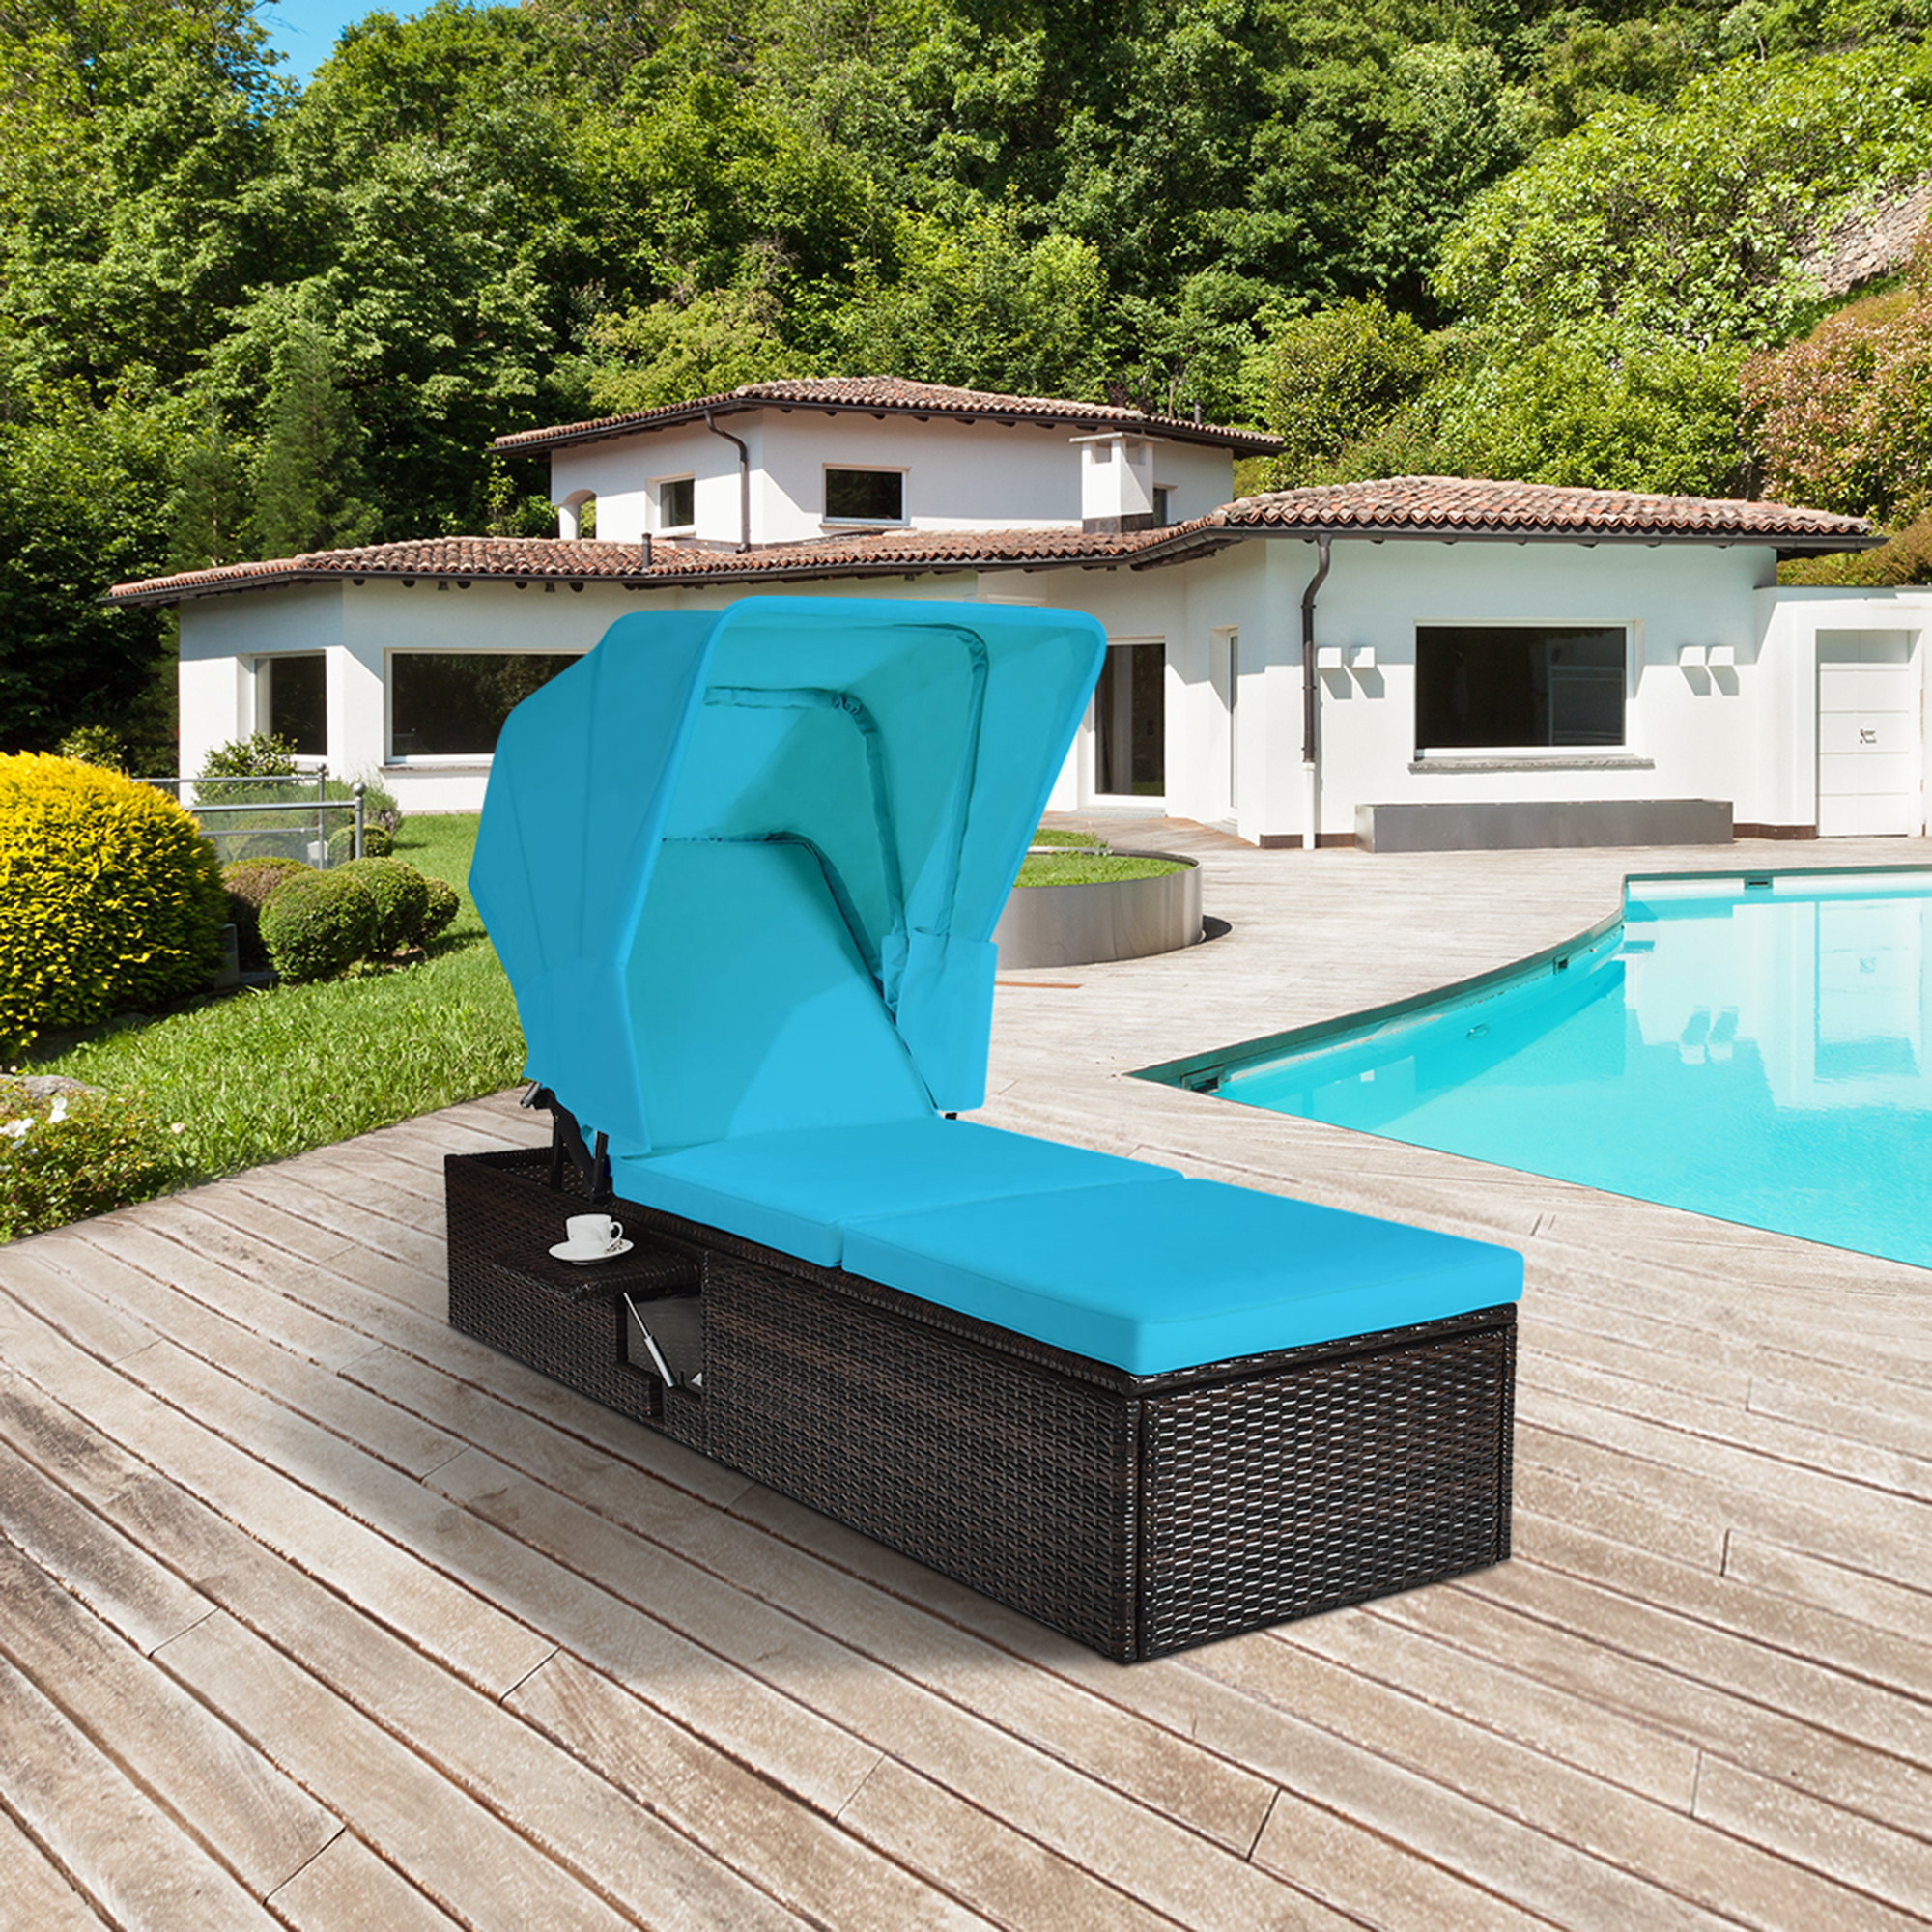 Gymax Rattan Patio Chaise Lounge Chair W/ Adjustable Canopy Turquoise Cushion - image 3 of 10